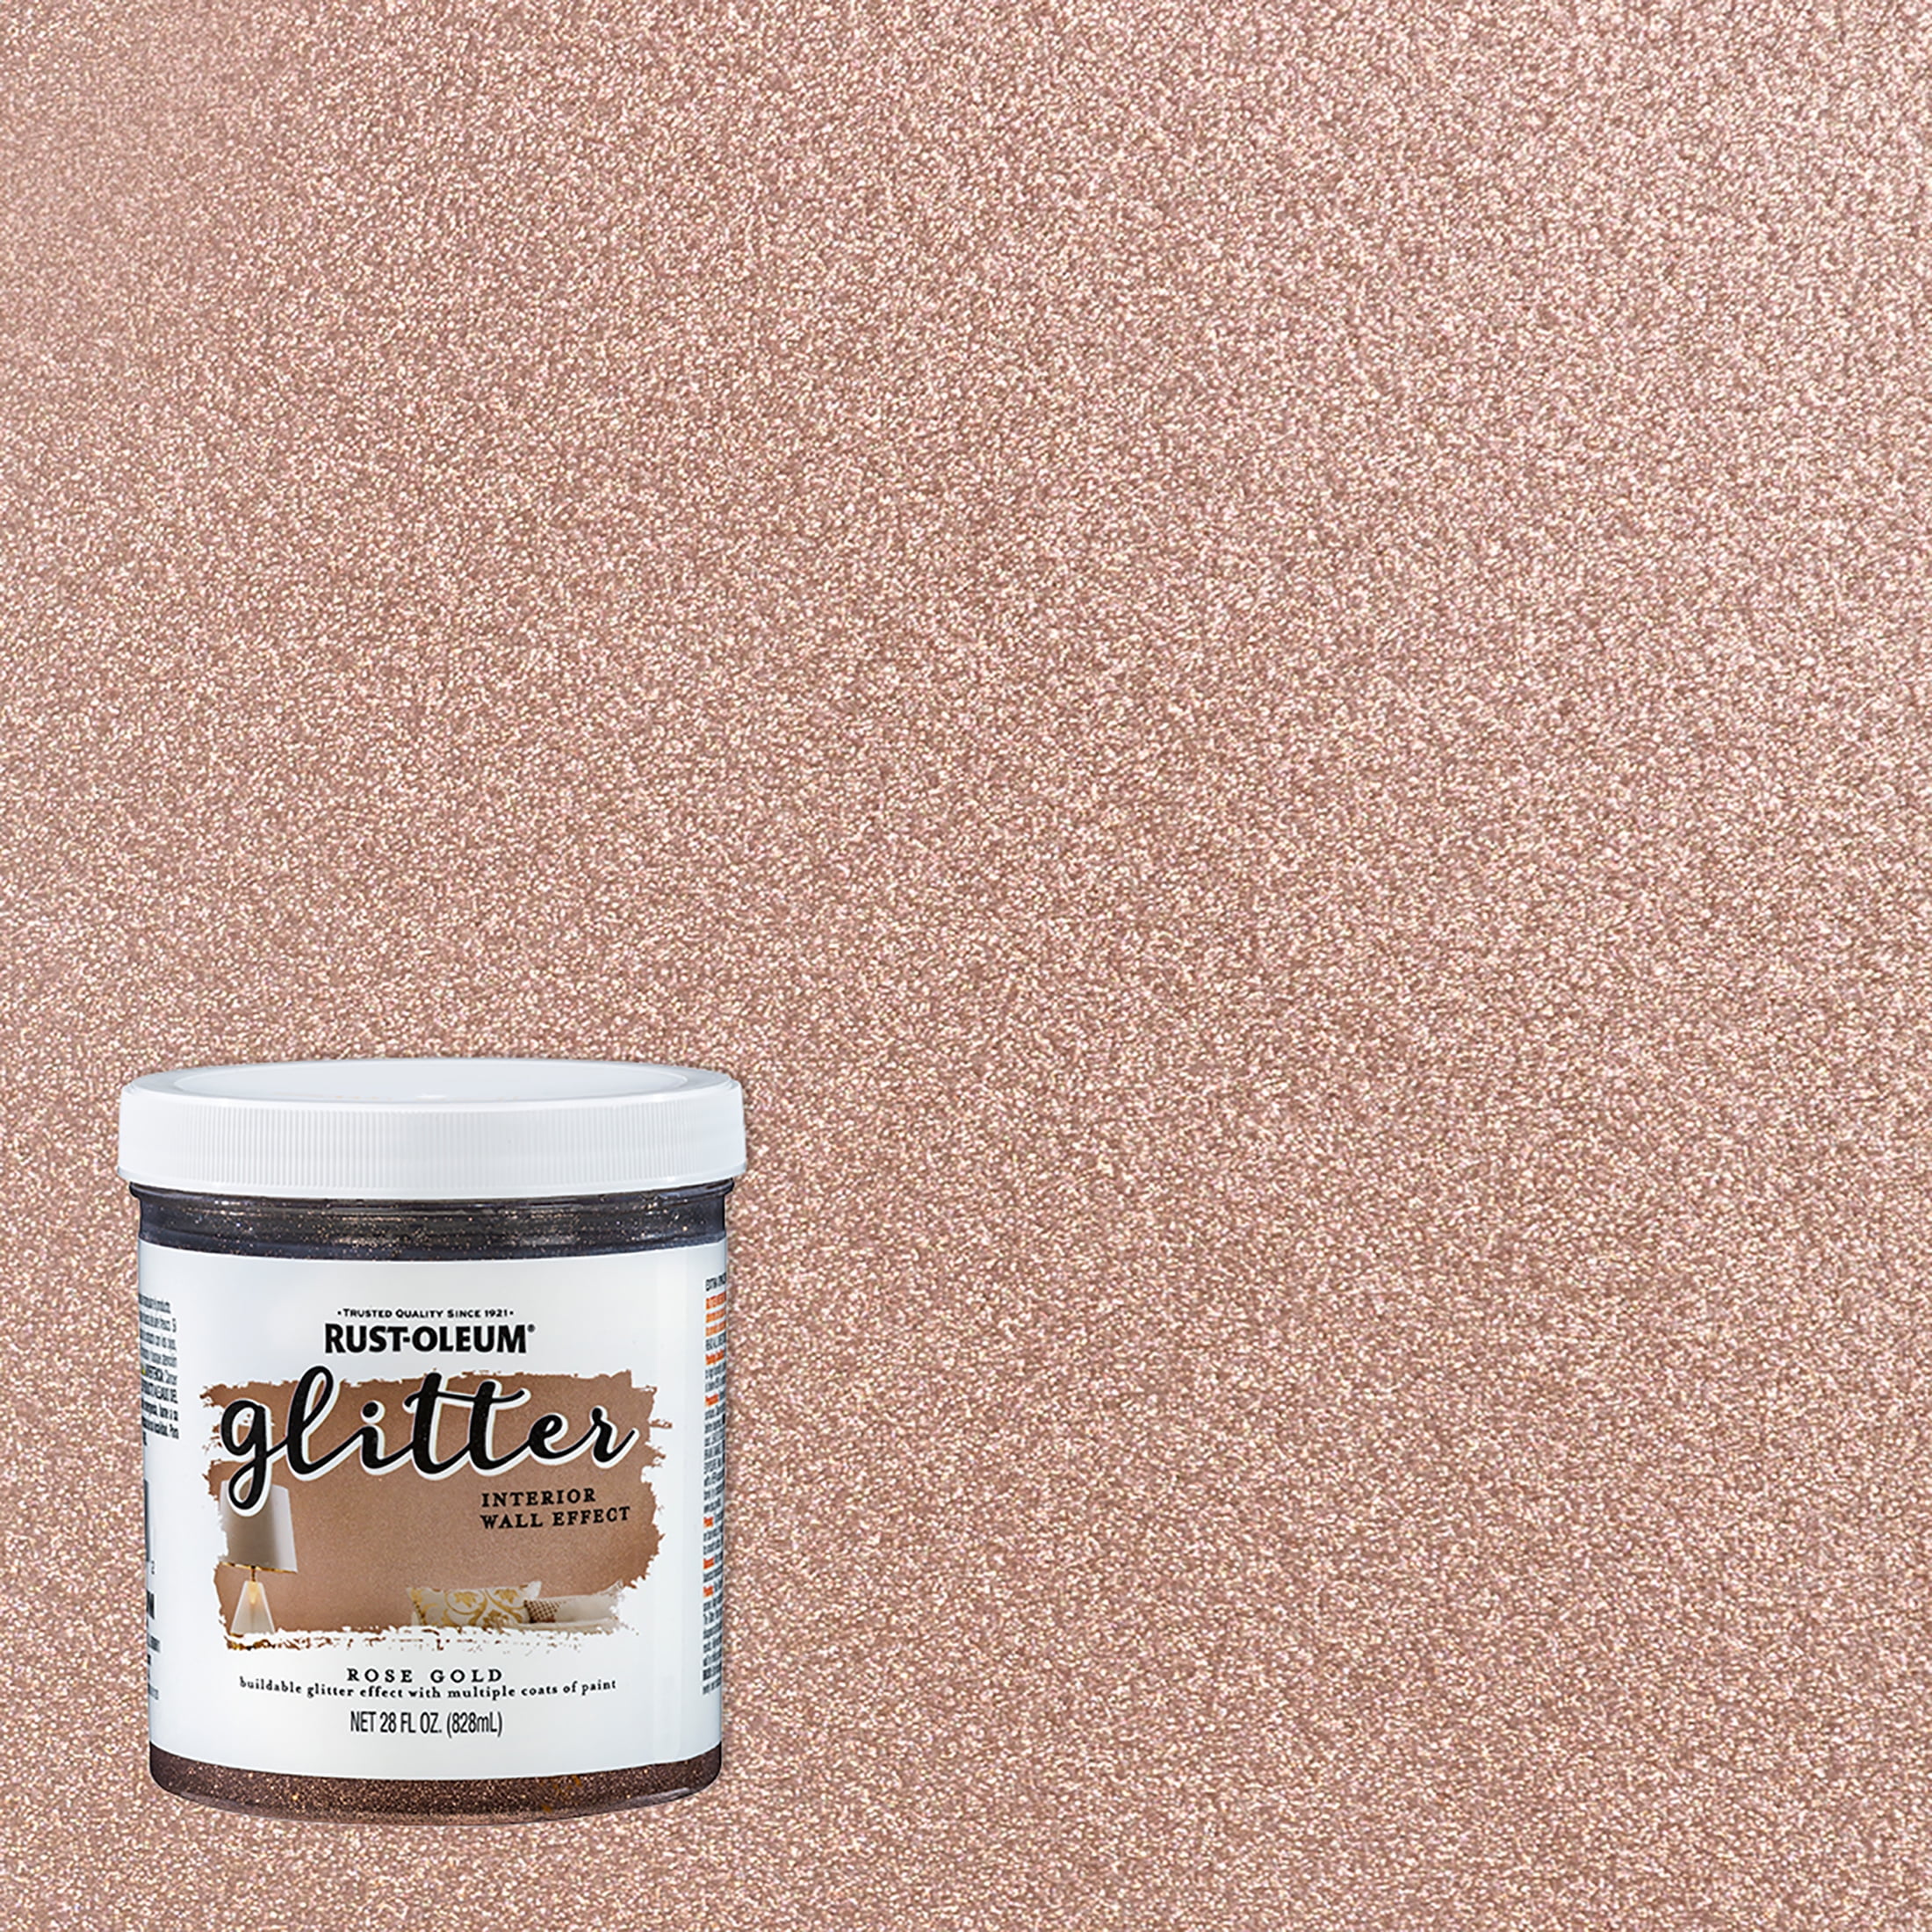 How to Add Glitter to Wall Paint